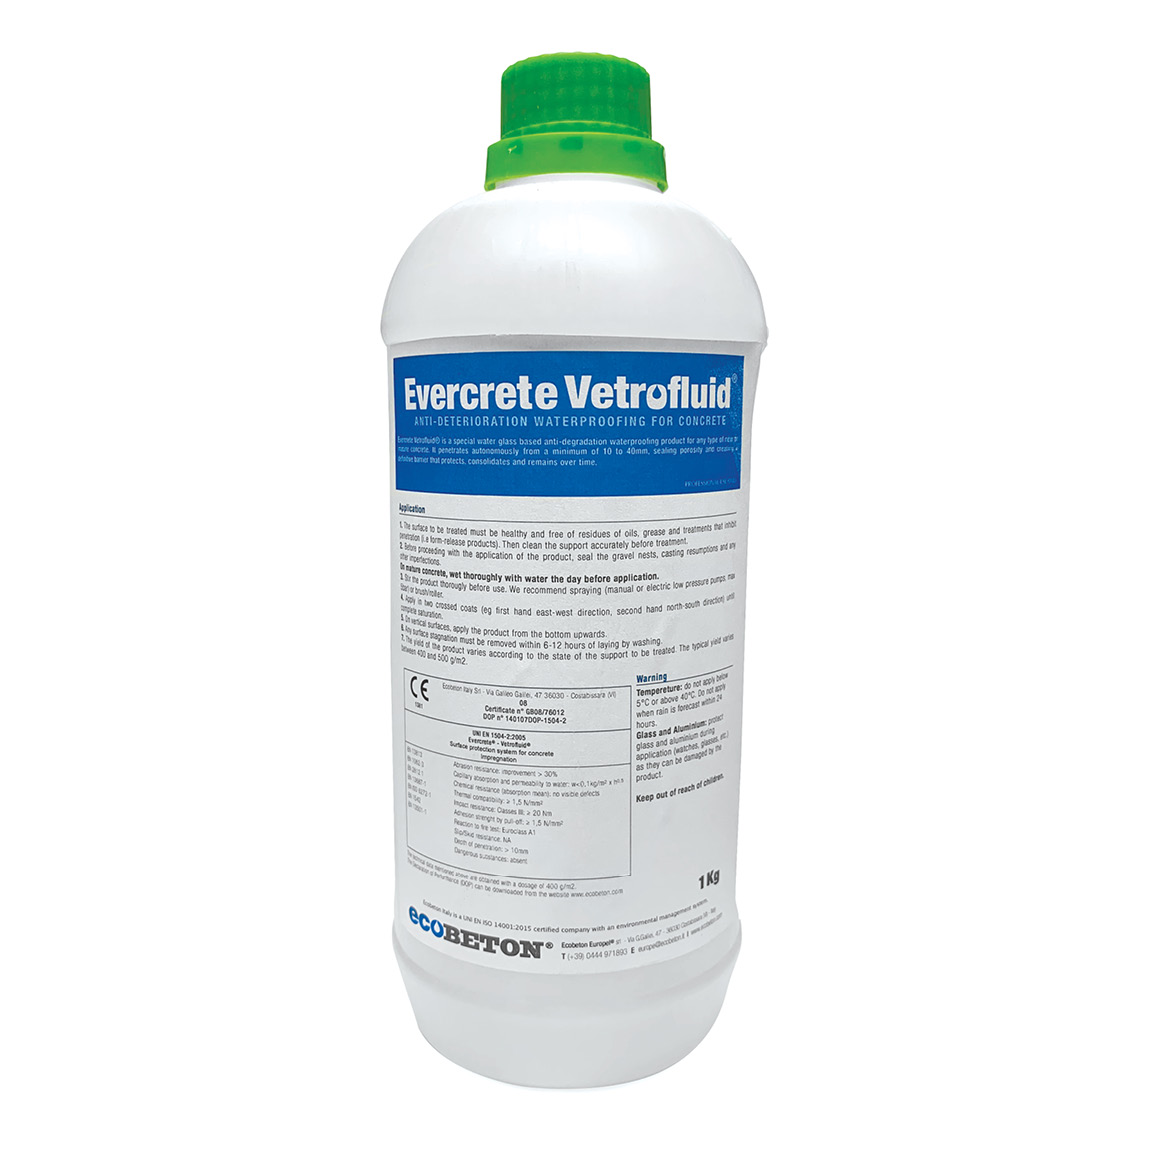 In addition to permanently waterproofing concrete structures, Evercrete Vetrofluid® protects constructions from the attack of deicing salts and freeze-thaw cycles, protects the reinforcement steels from the action of carbonation, consolidates and Increase